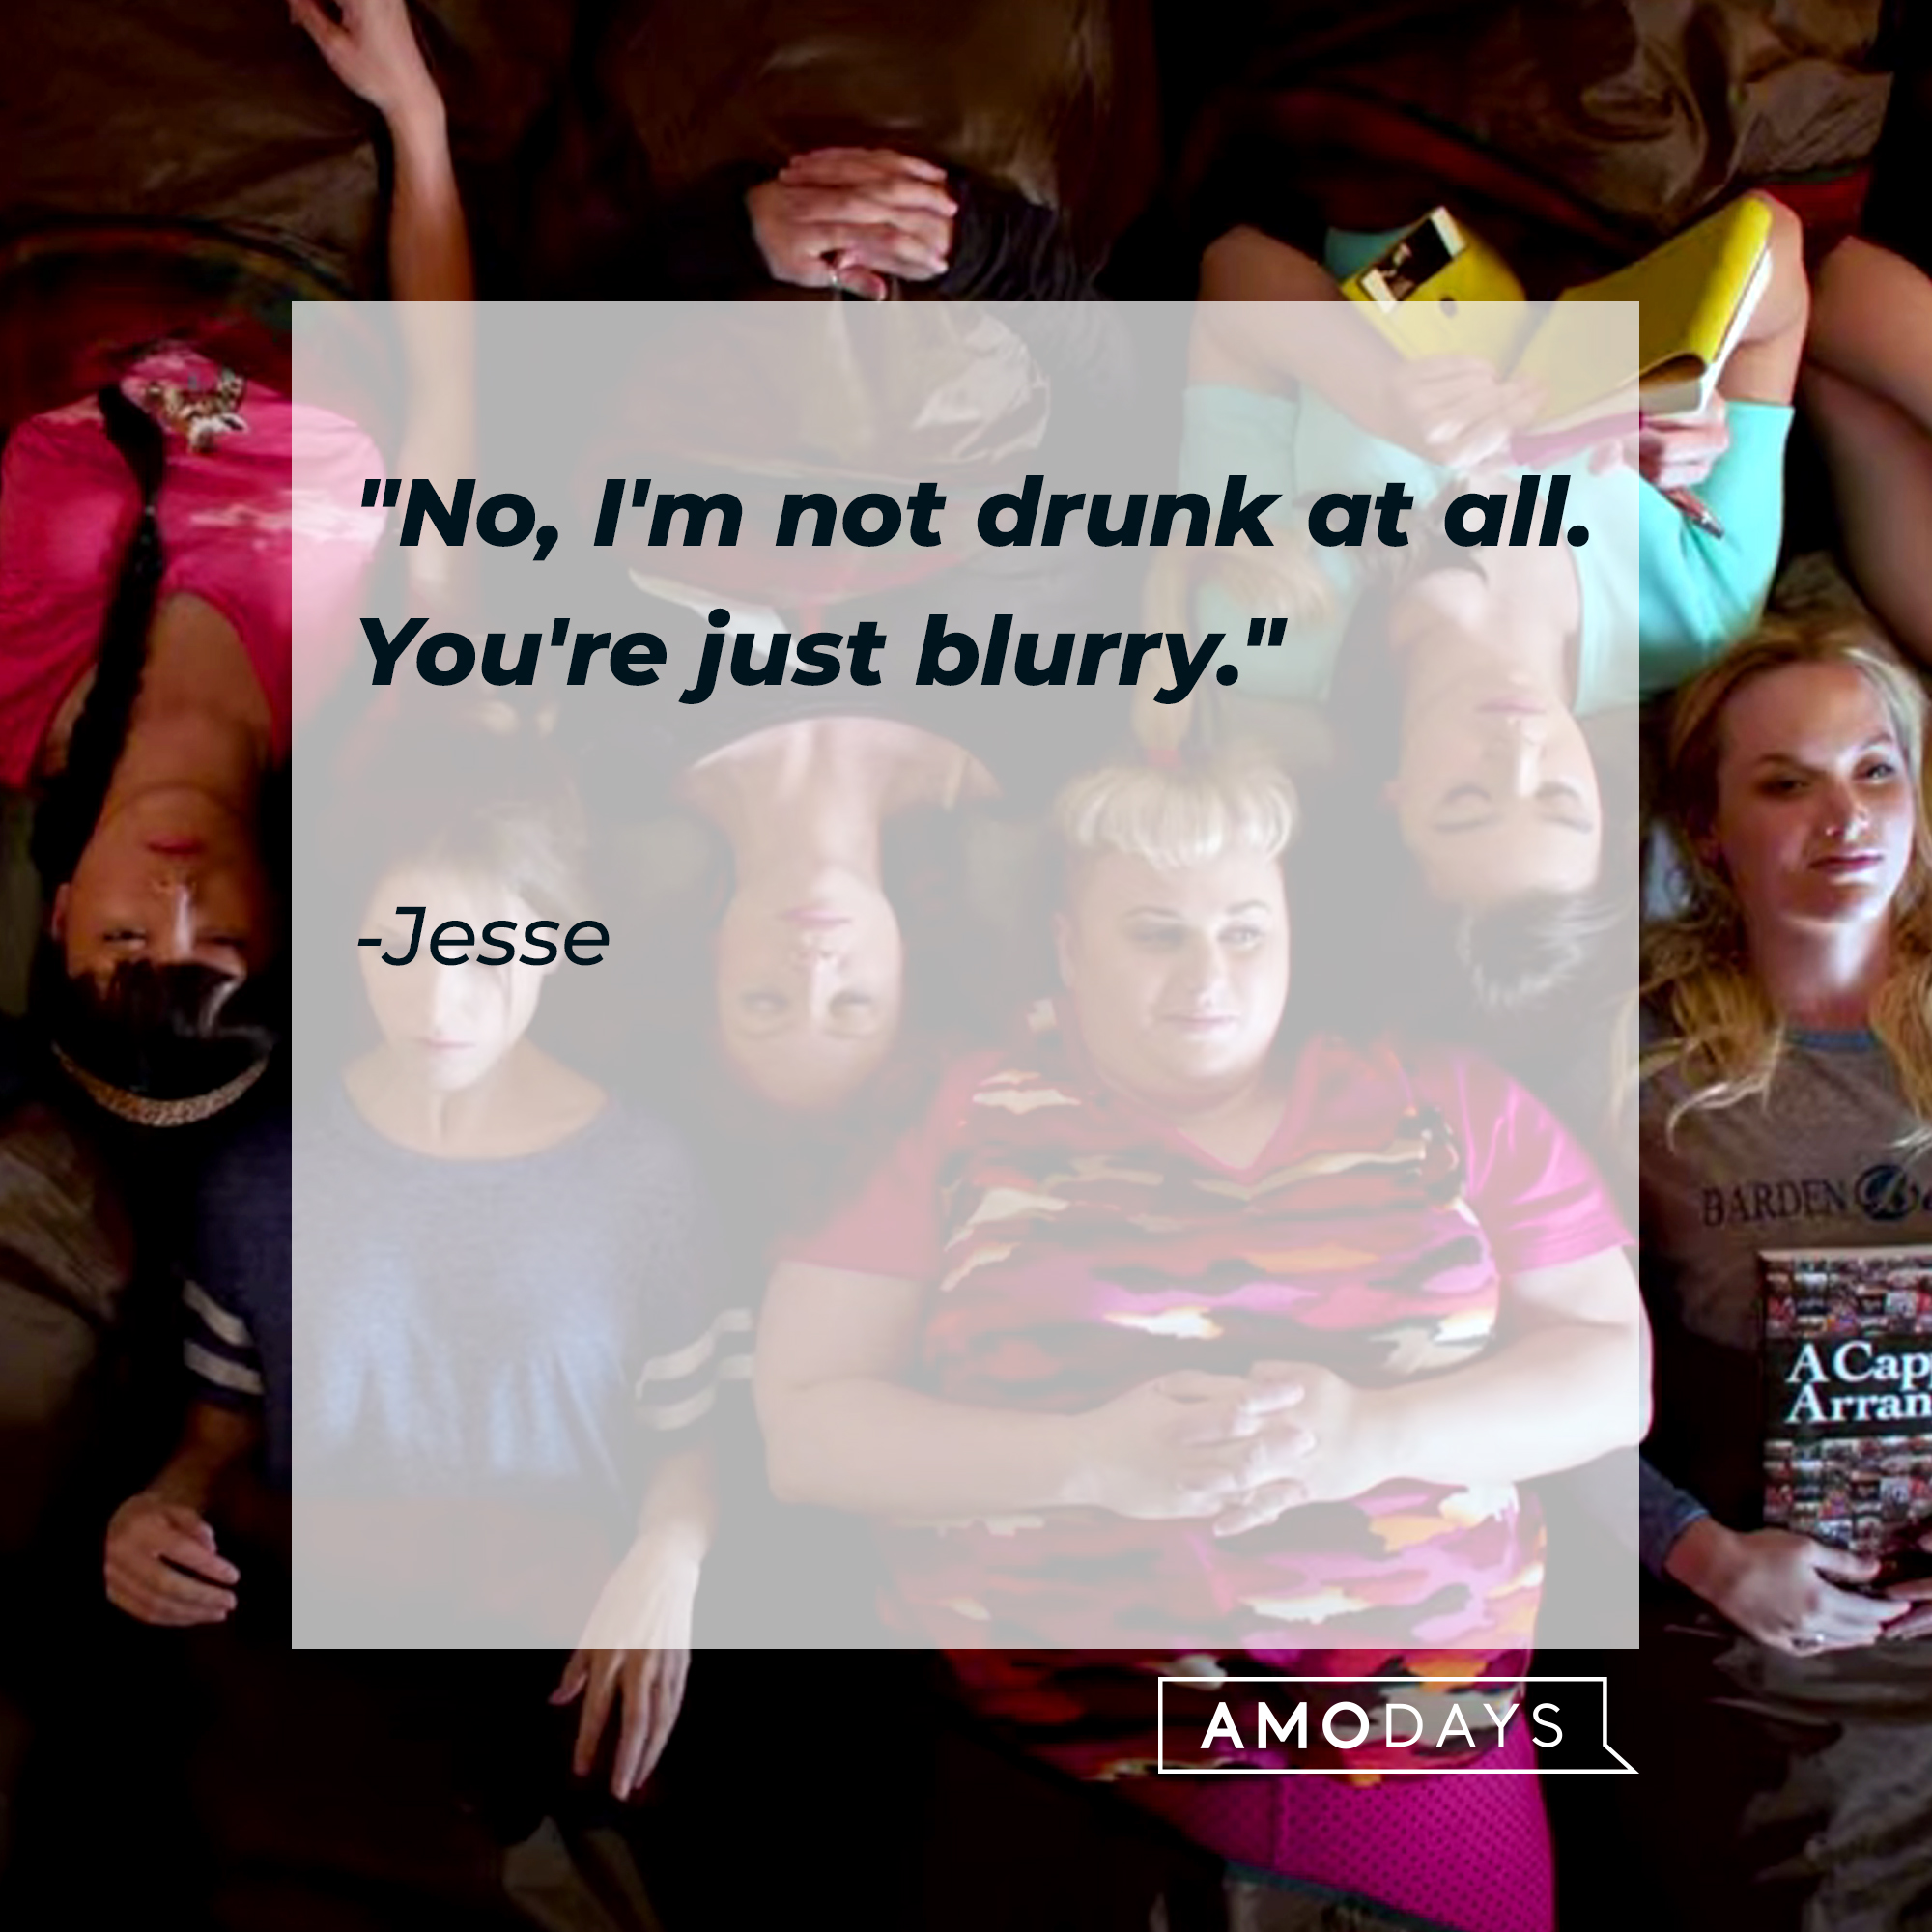 The Jesse quote, "No, I'm not drunk at all. You're just blurry." | Source: youtube.com/PitchPerfect